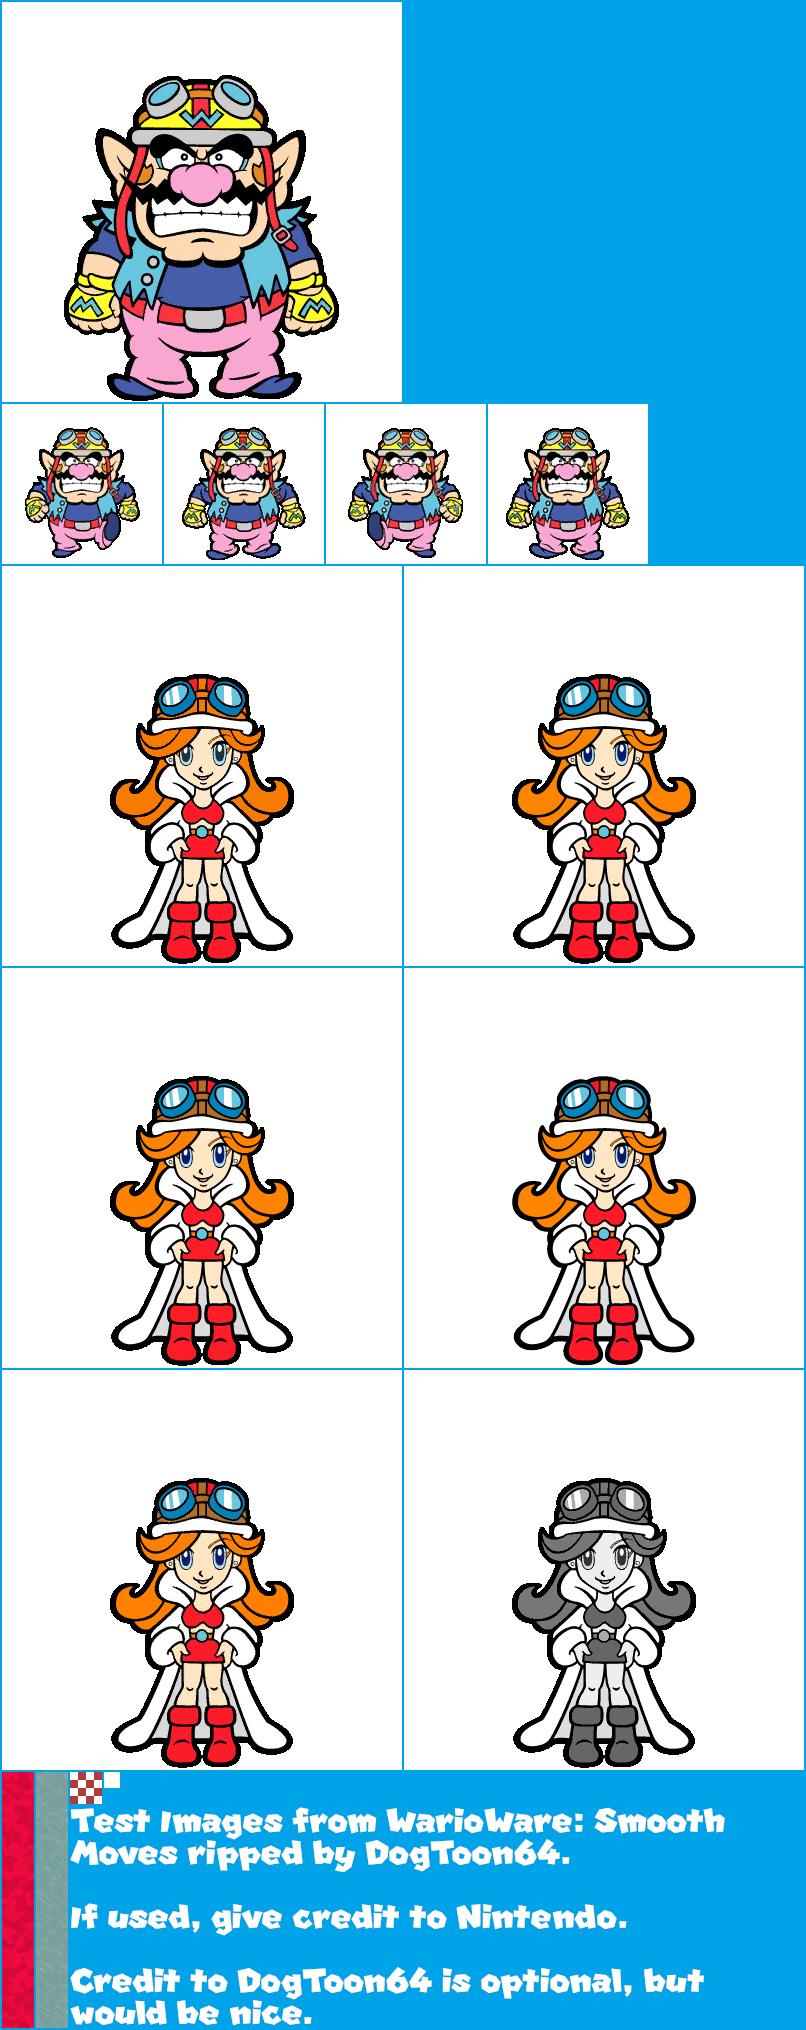 WarioWare: Smooth Moves - Test Images